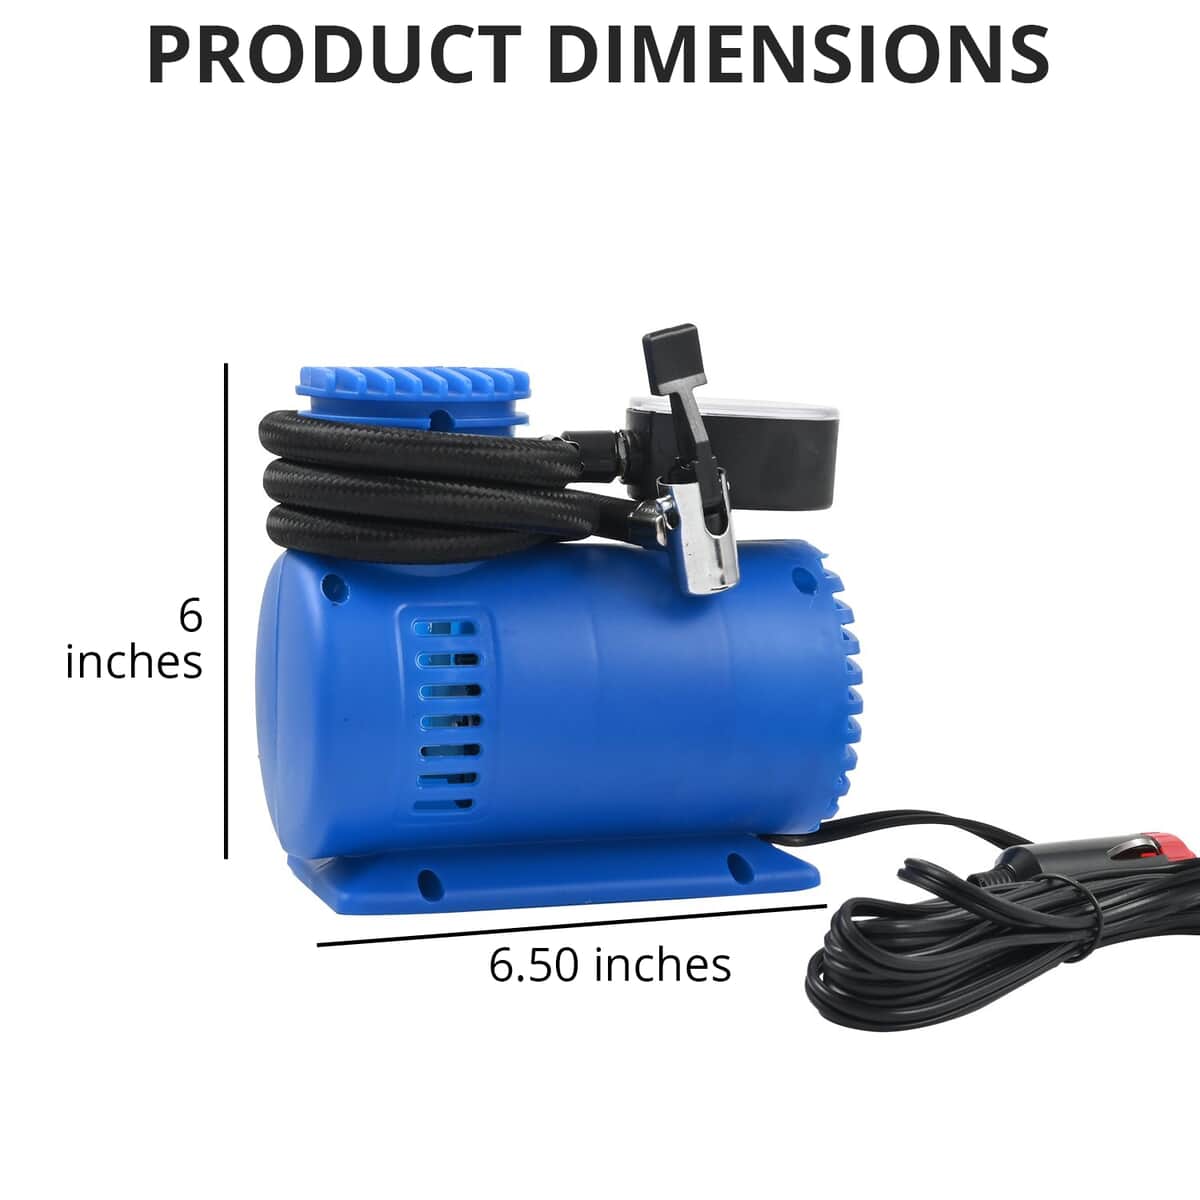 AUTO EFFECTS Mini Air Compressor with Built-in Pressure Gauge -Blue image number 4